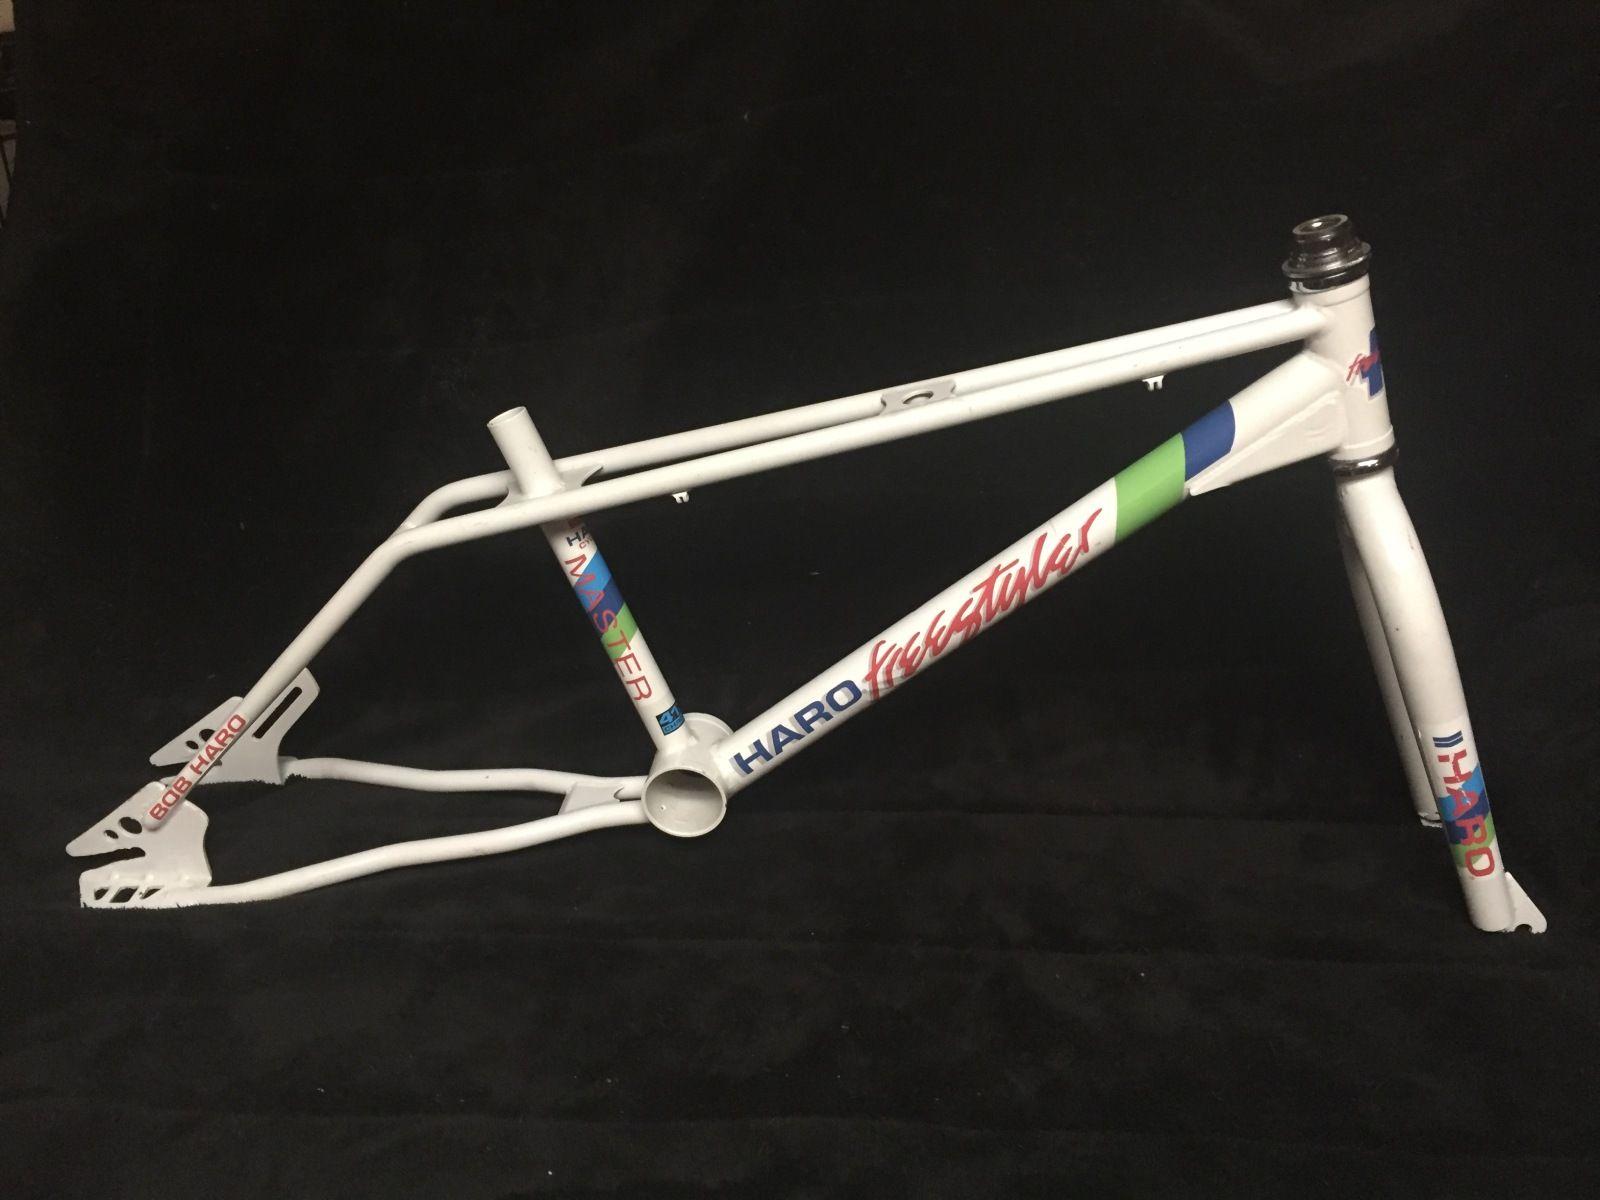 Help Identifying the year of a Haro Freestyler Master frame